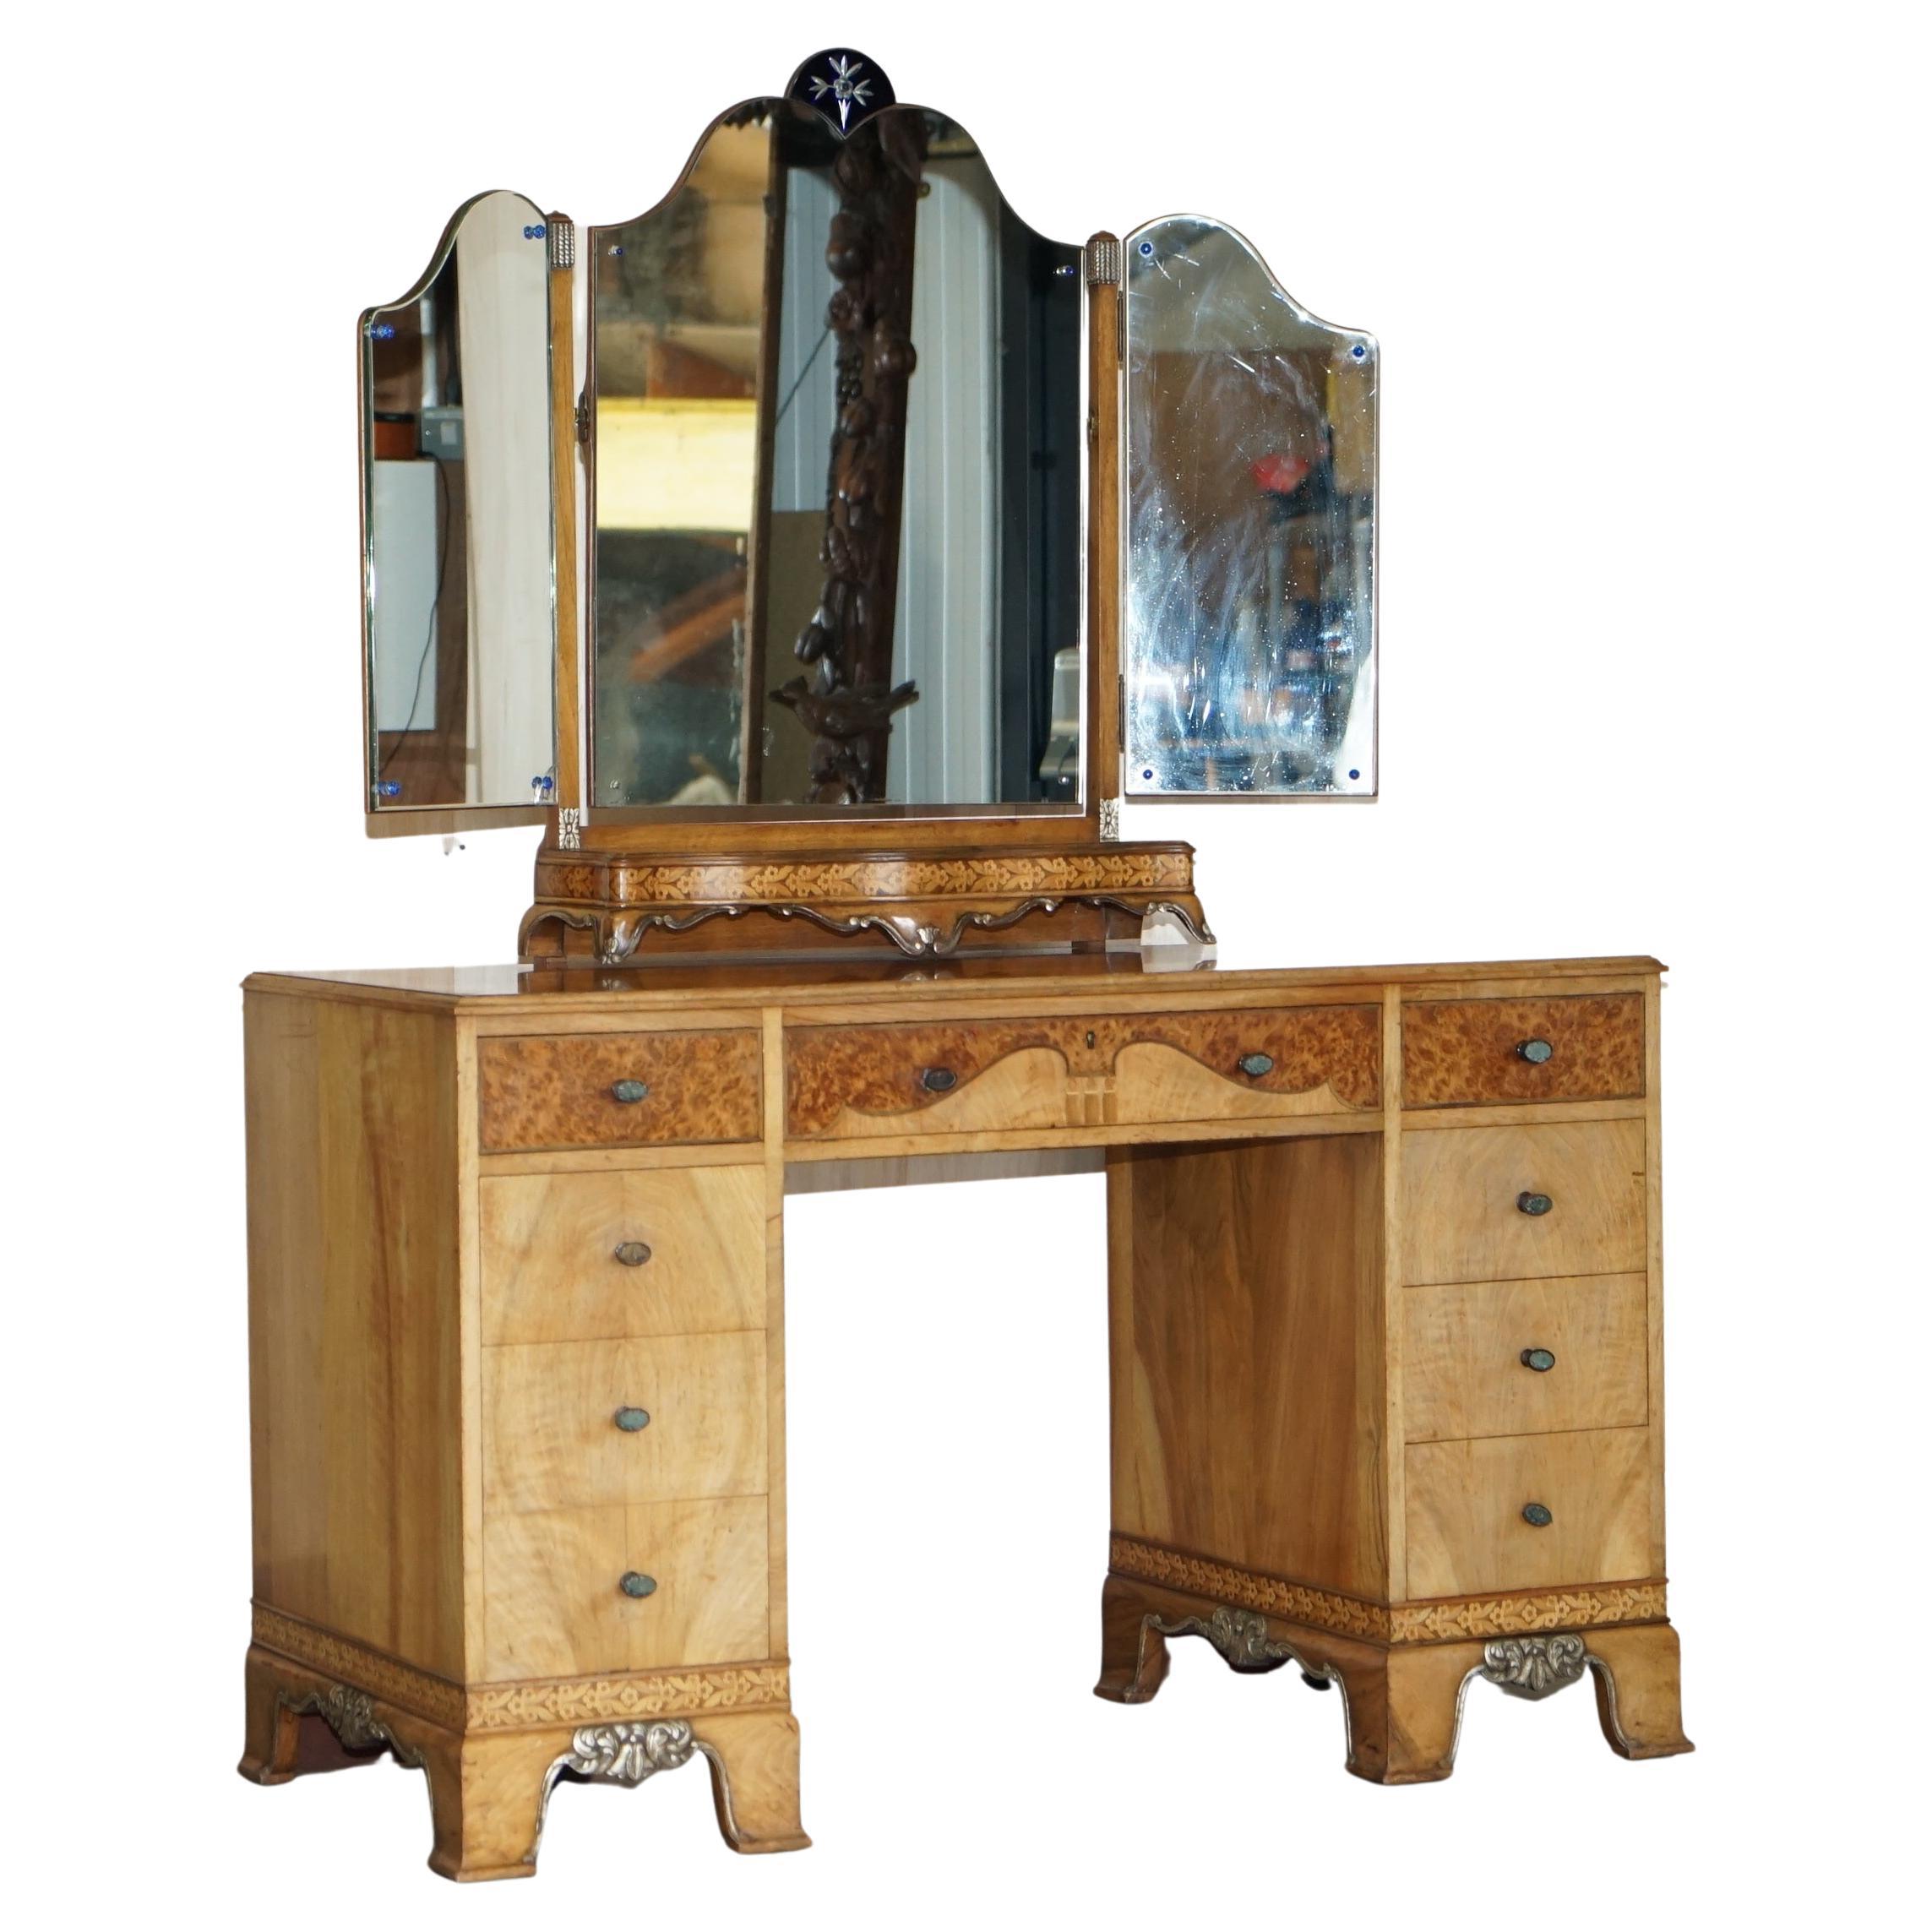 We are delighted to offer for sale this finest quality Waring & Gillow Lancaster, Burr Walnut inlaid Dressing table with tri folding mirrors which is part of a suite

This piece is part of a bedroom set, I have in total a triple bank wardrobe,